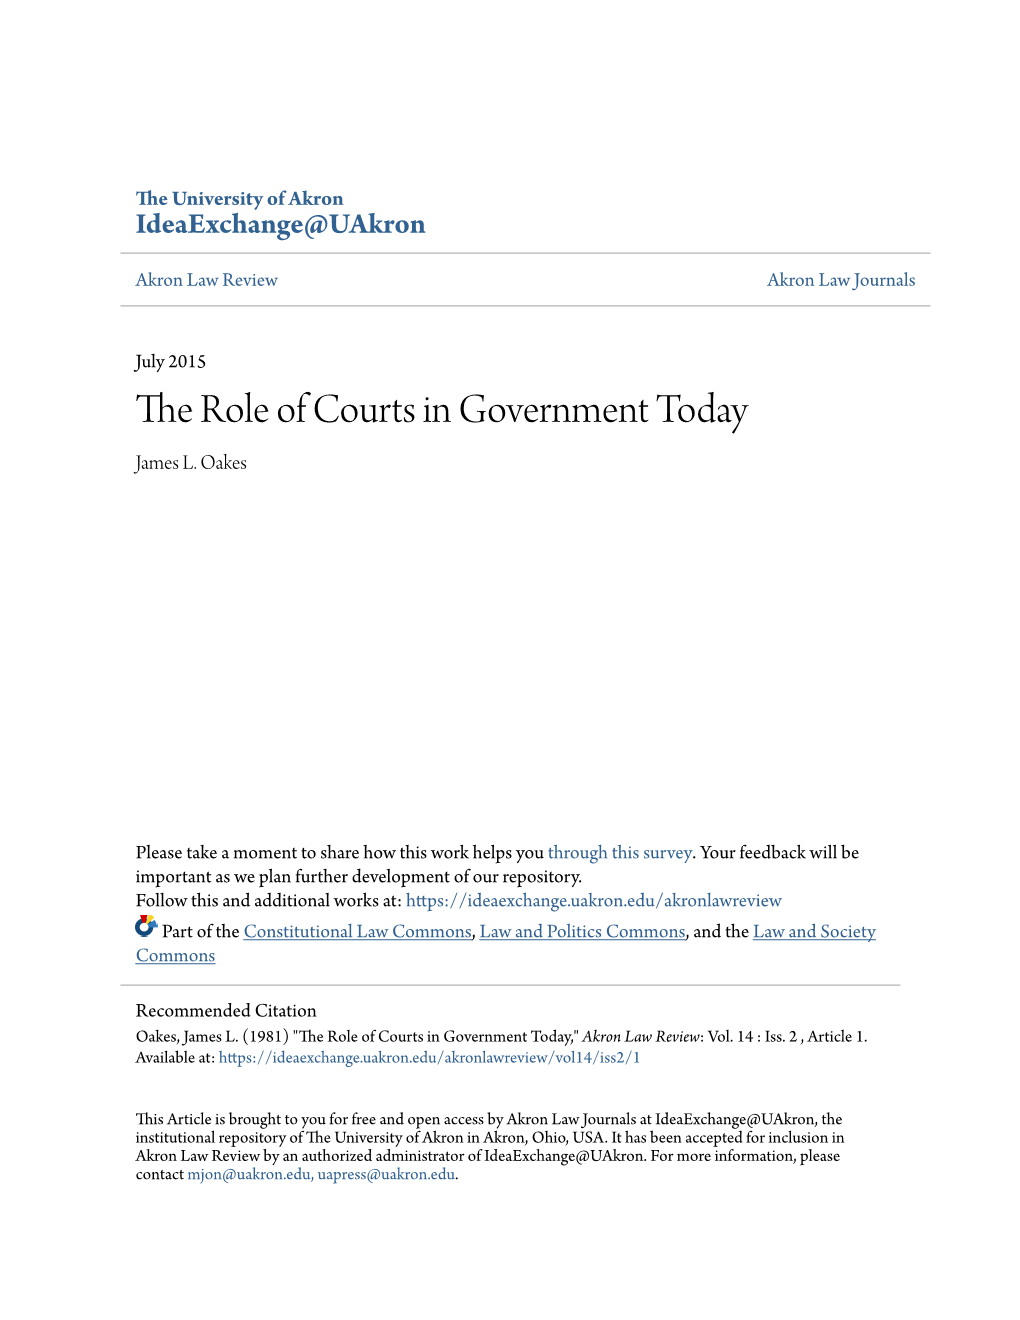 The Role of Courts in Government Today James L